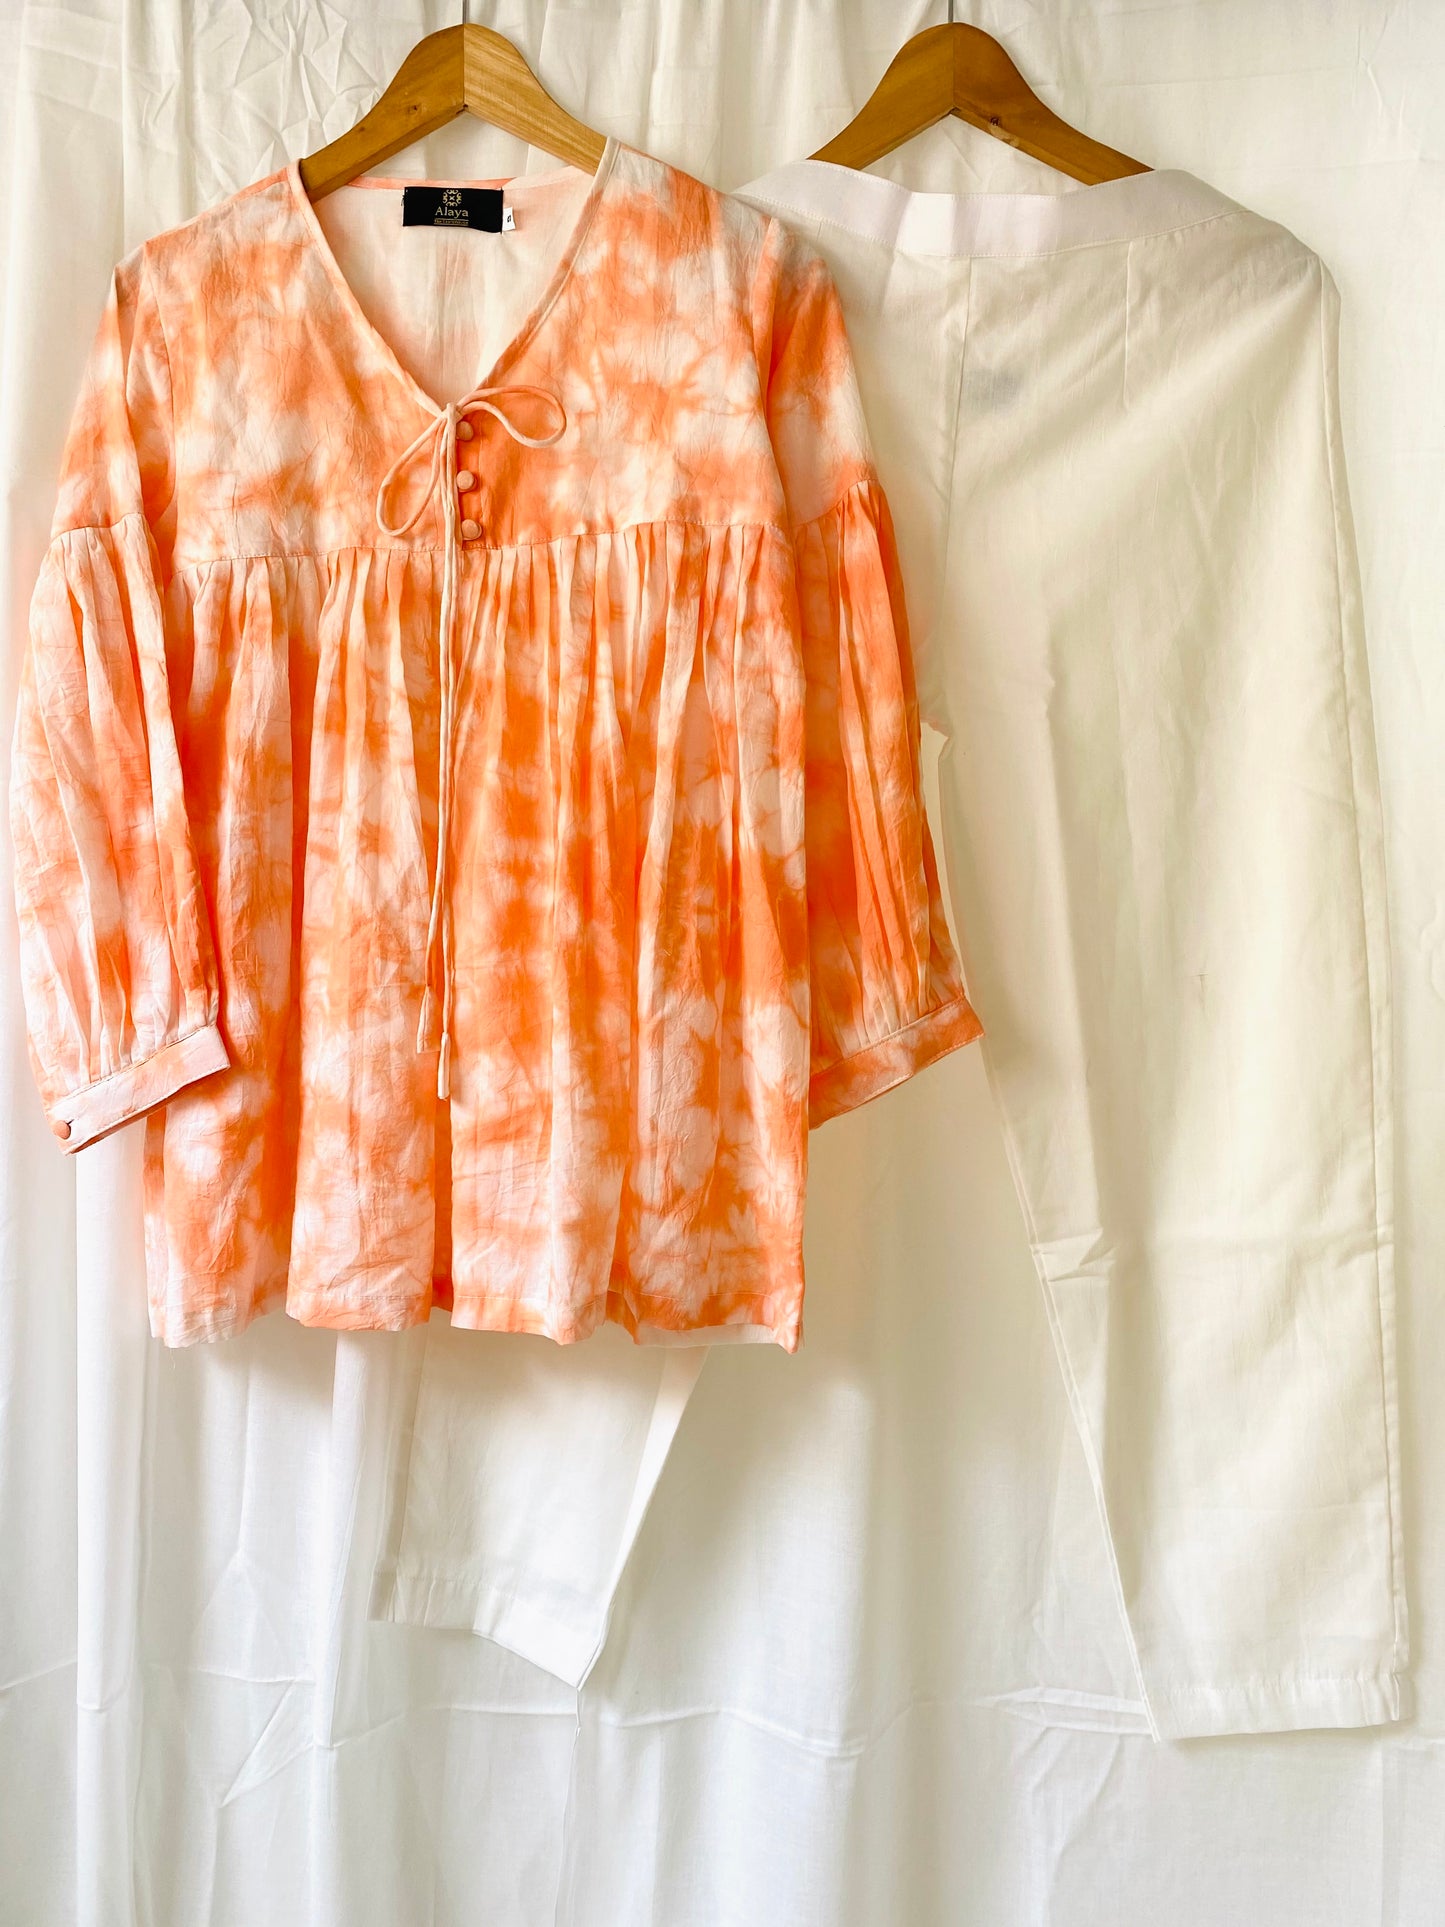 Mud Peach Tie Dye Top with solid White Pants